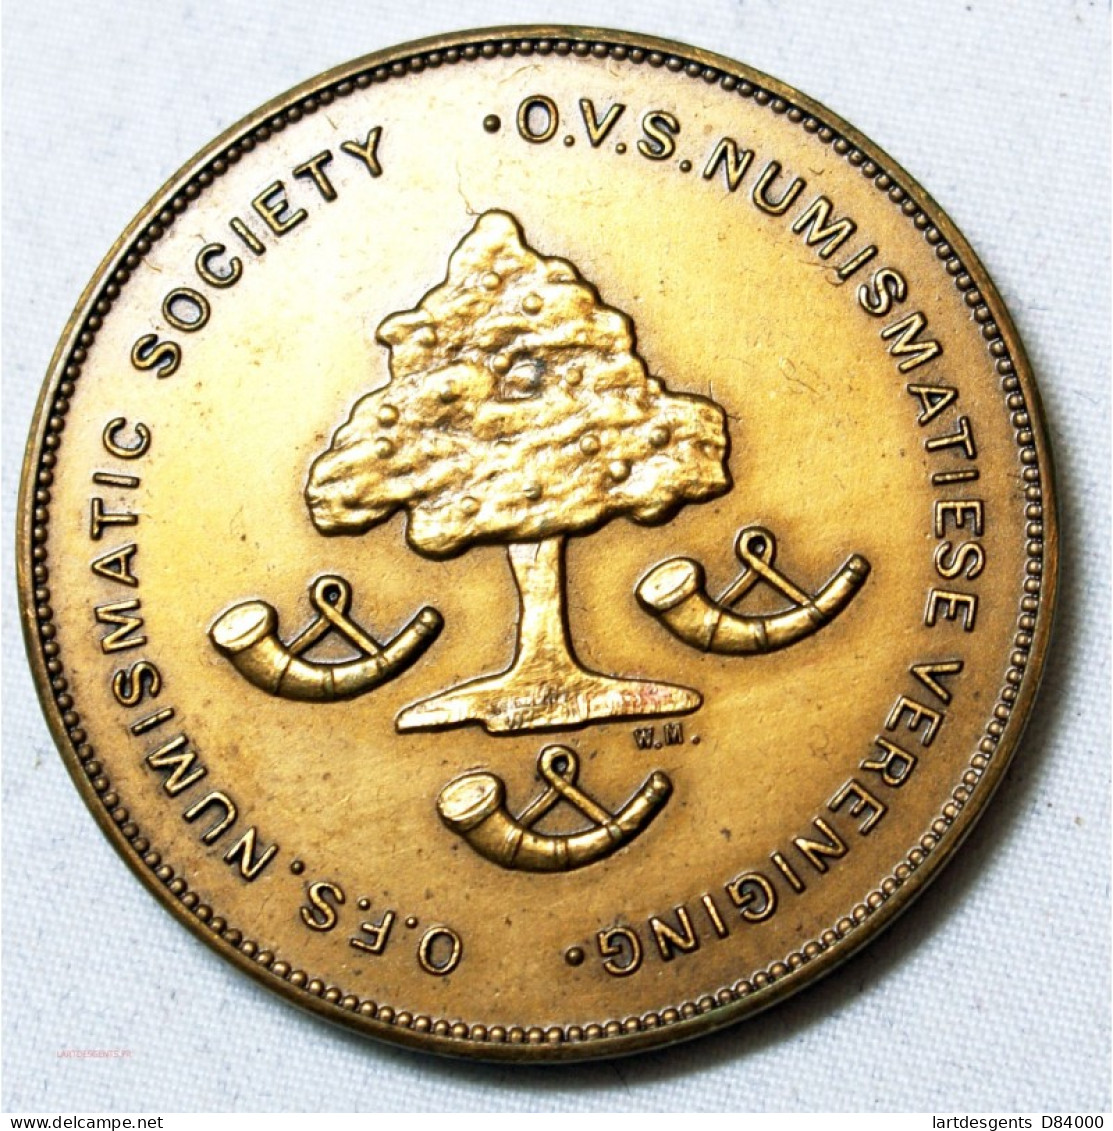 Médaille Afrique Du Sud, OFS Numismatics Society Founding In 1966 - Firma's